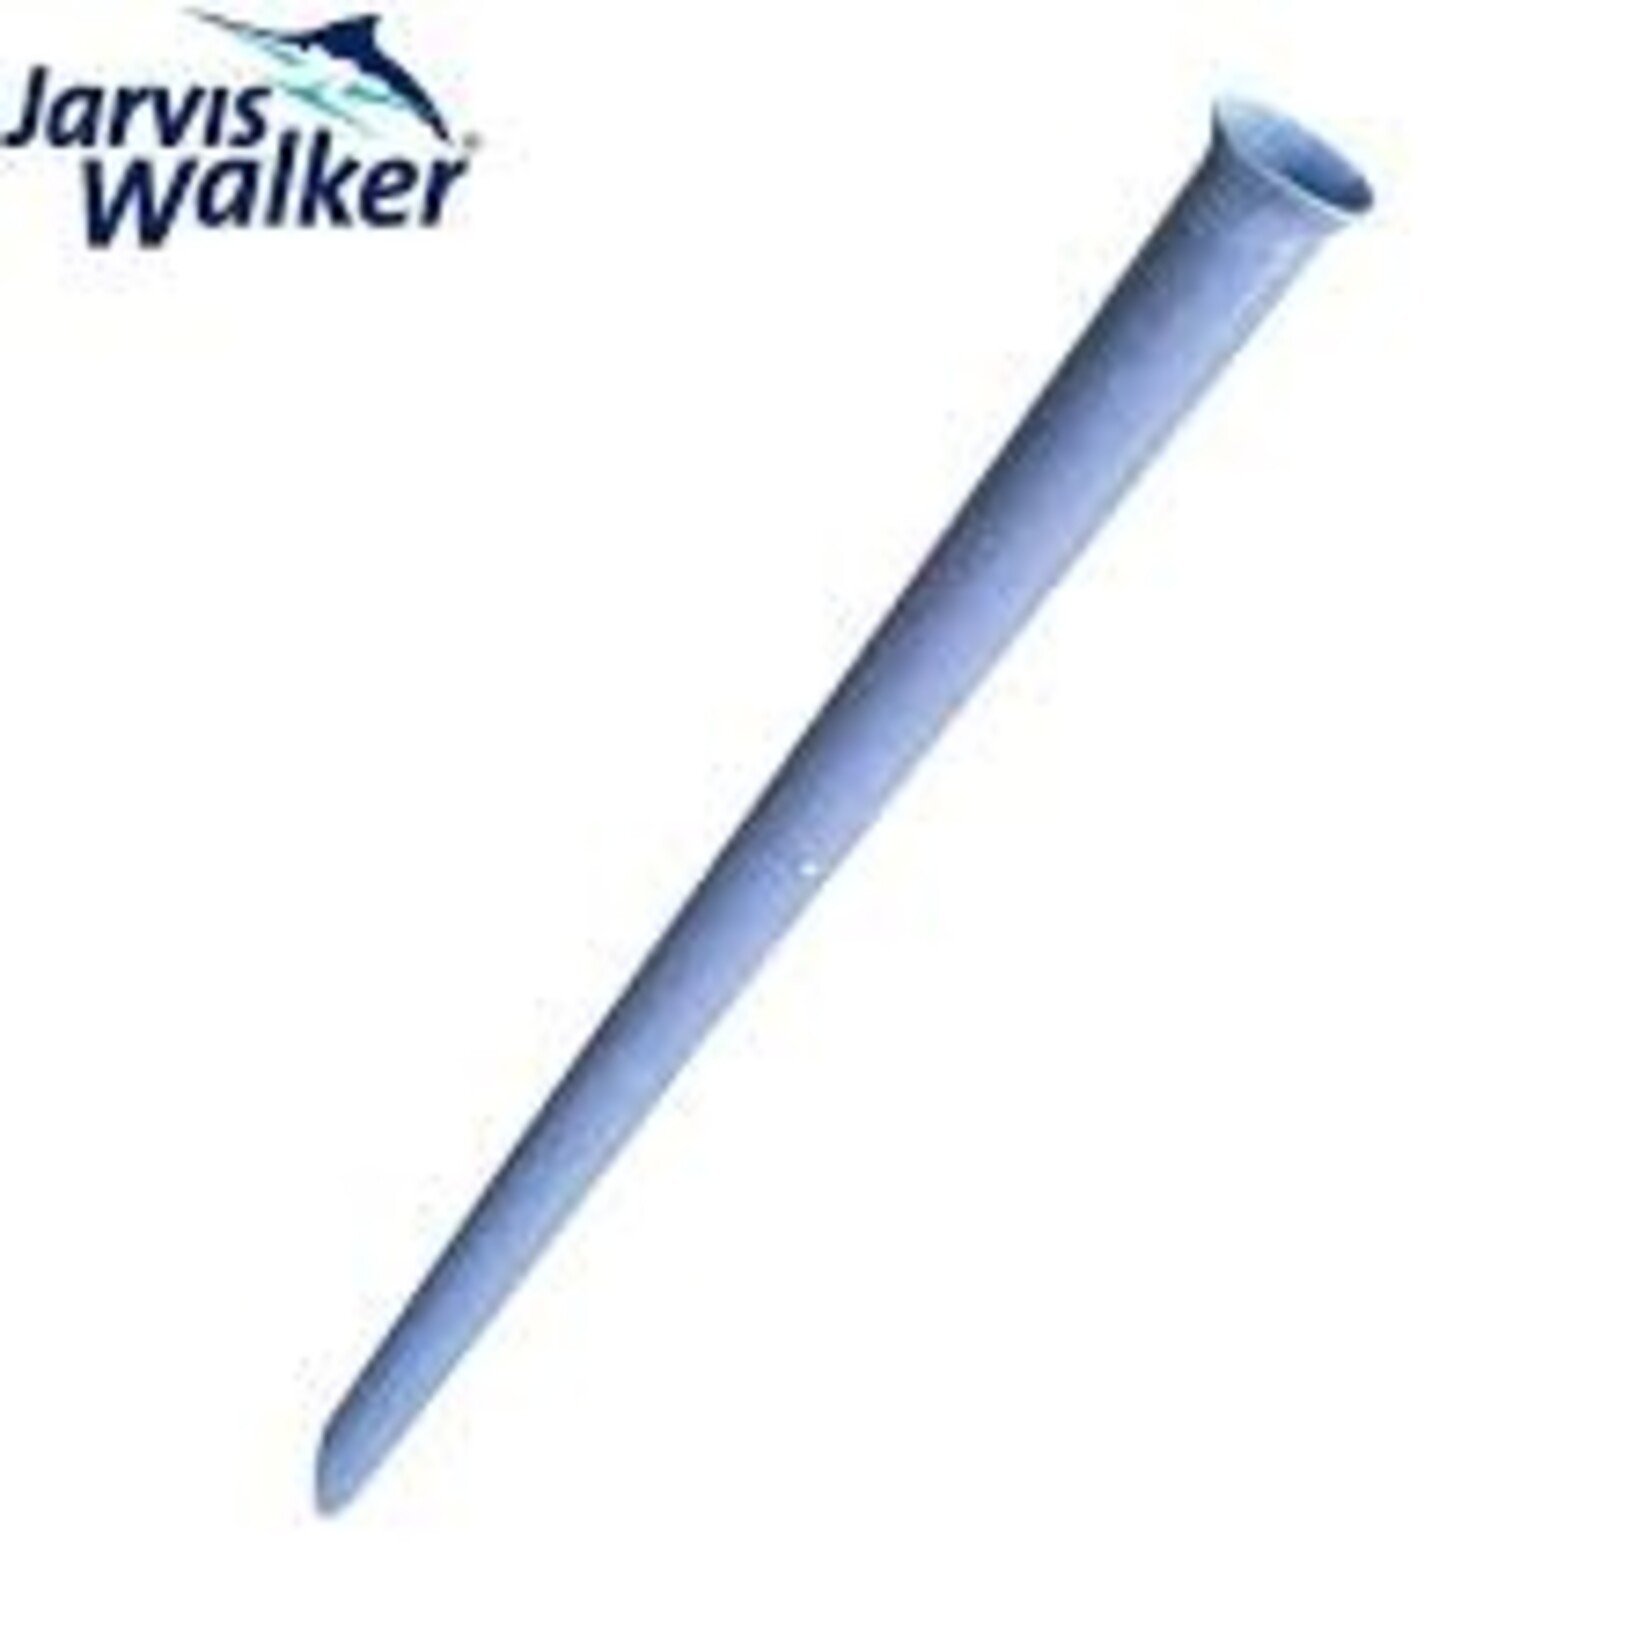 JARVIS WALKER Surf Rod Holder X/Long - Port Kennedy Cycles and Fishing